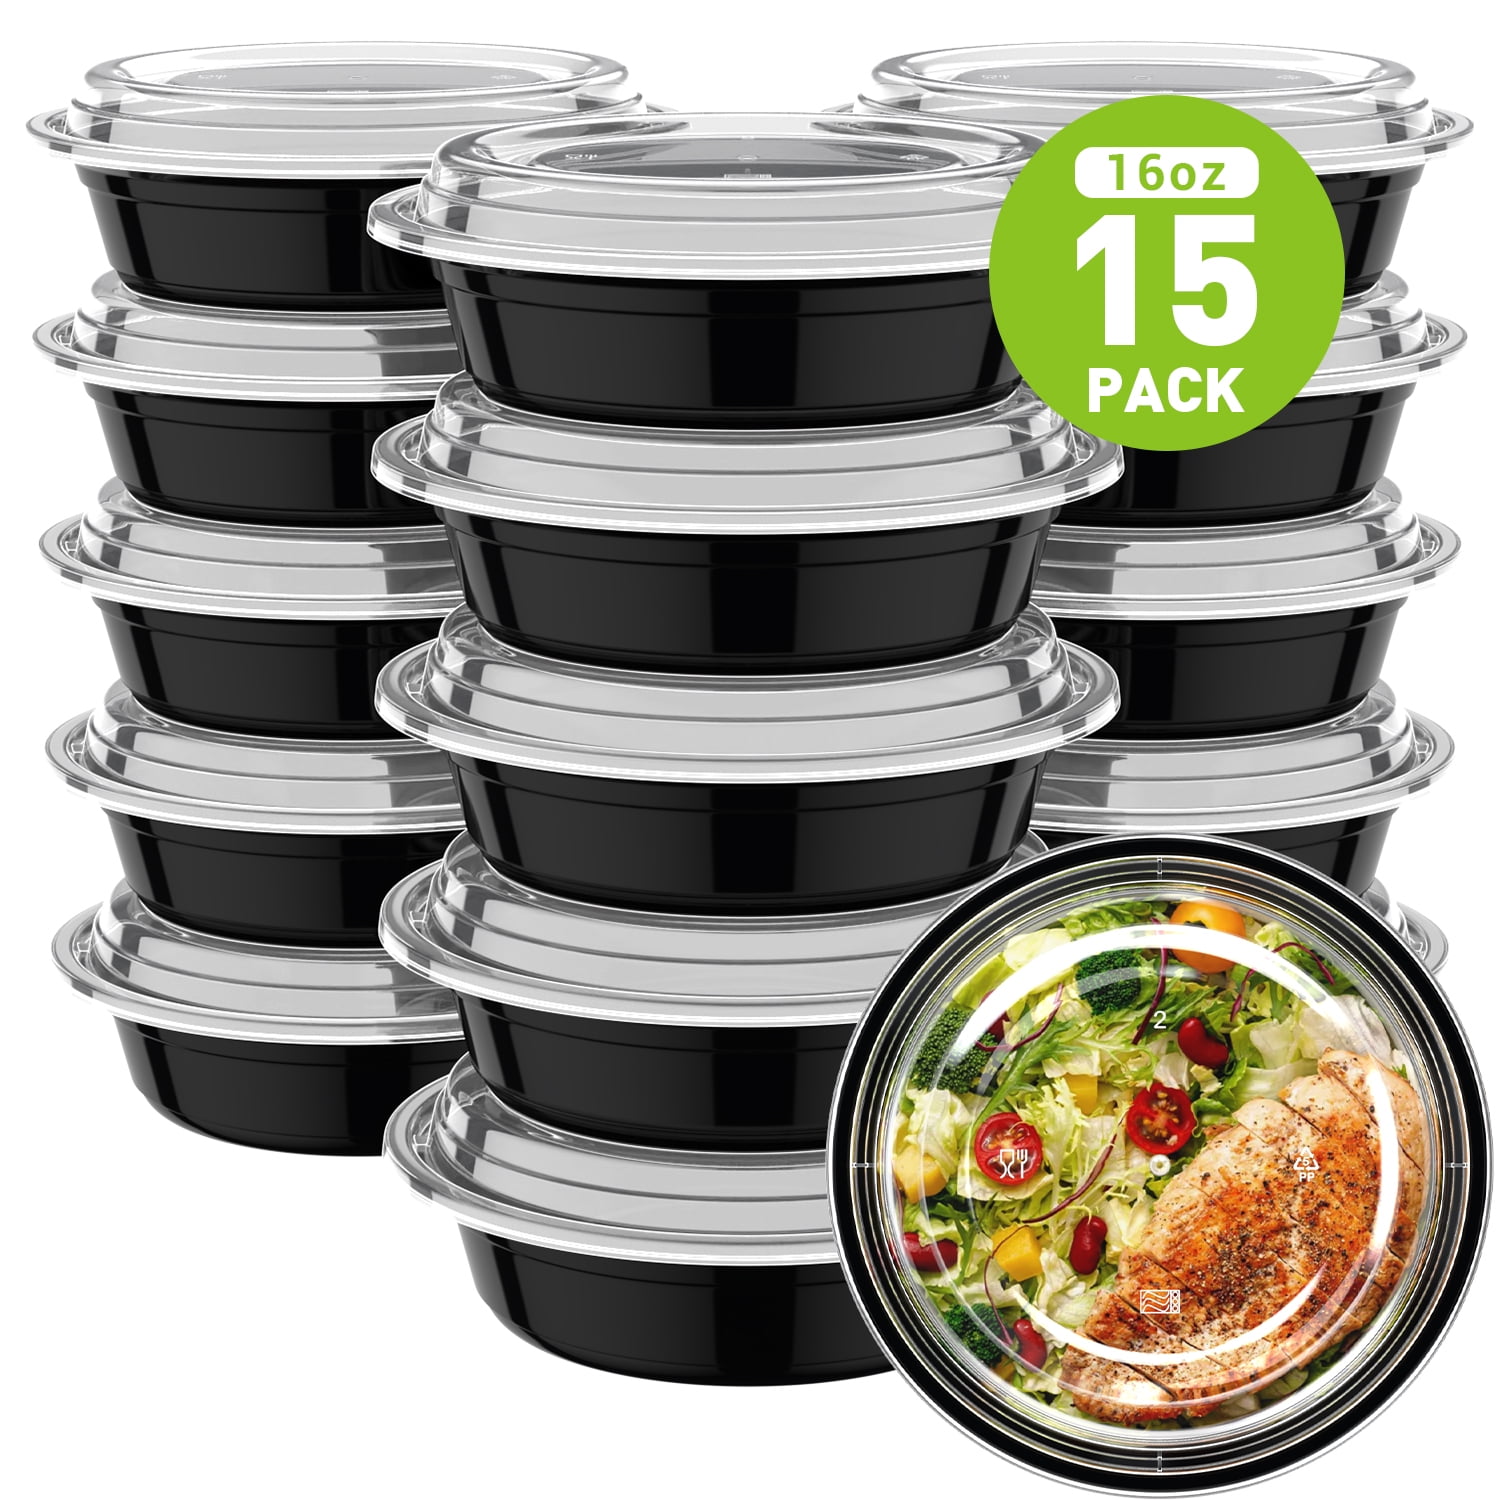 Fonteme 32 oz Round Meal Prep Container with Lids – 50 Pack | Disposable Food Storage Containers | BPA-Free, Microwave, Freezer, and Dishwasher Safe